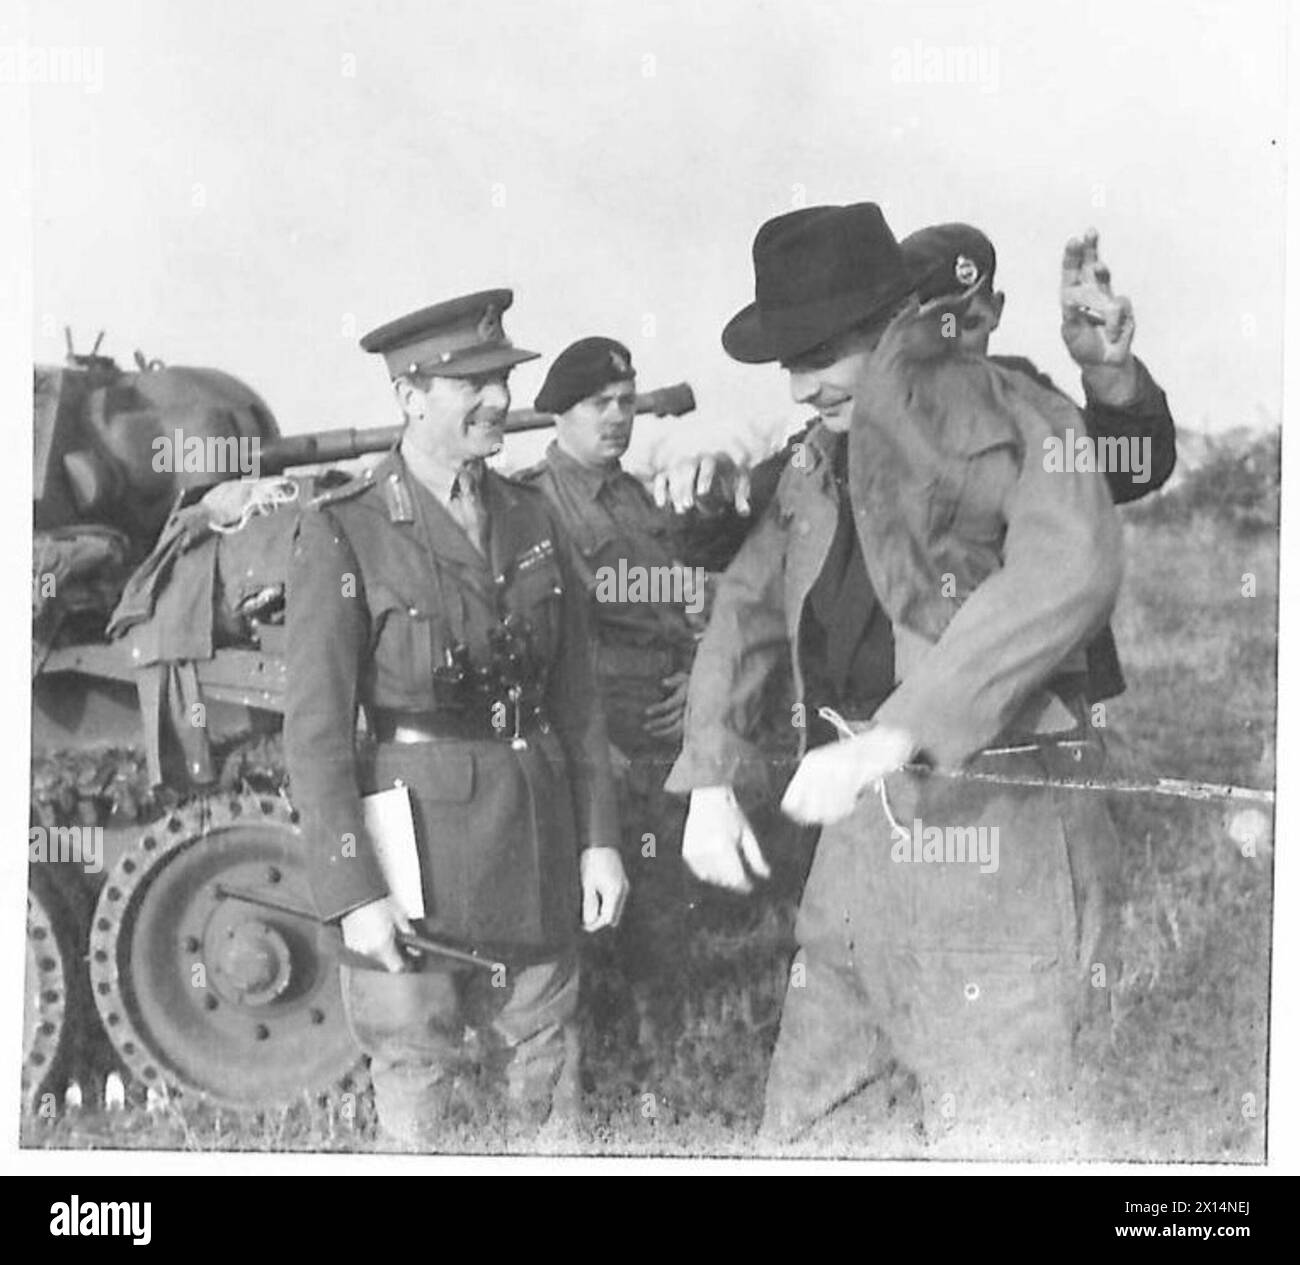 COMMANDER IN CHIEF FOLLOWS BIG EXERCISE IN TANK - Mr. Anthony Eden donning a battle dress overall before boarding one of the tanks British Army Stock Photo